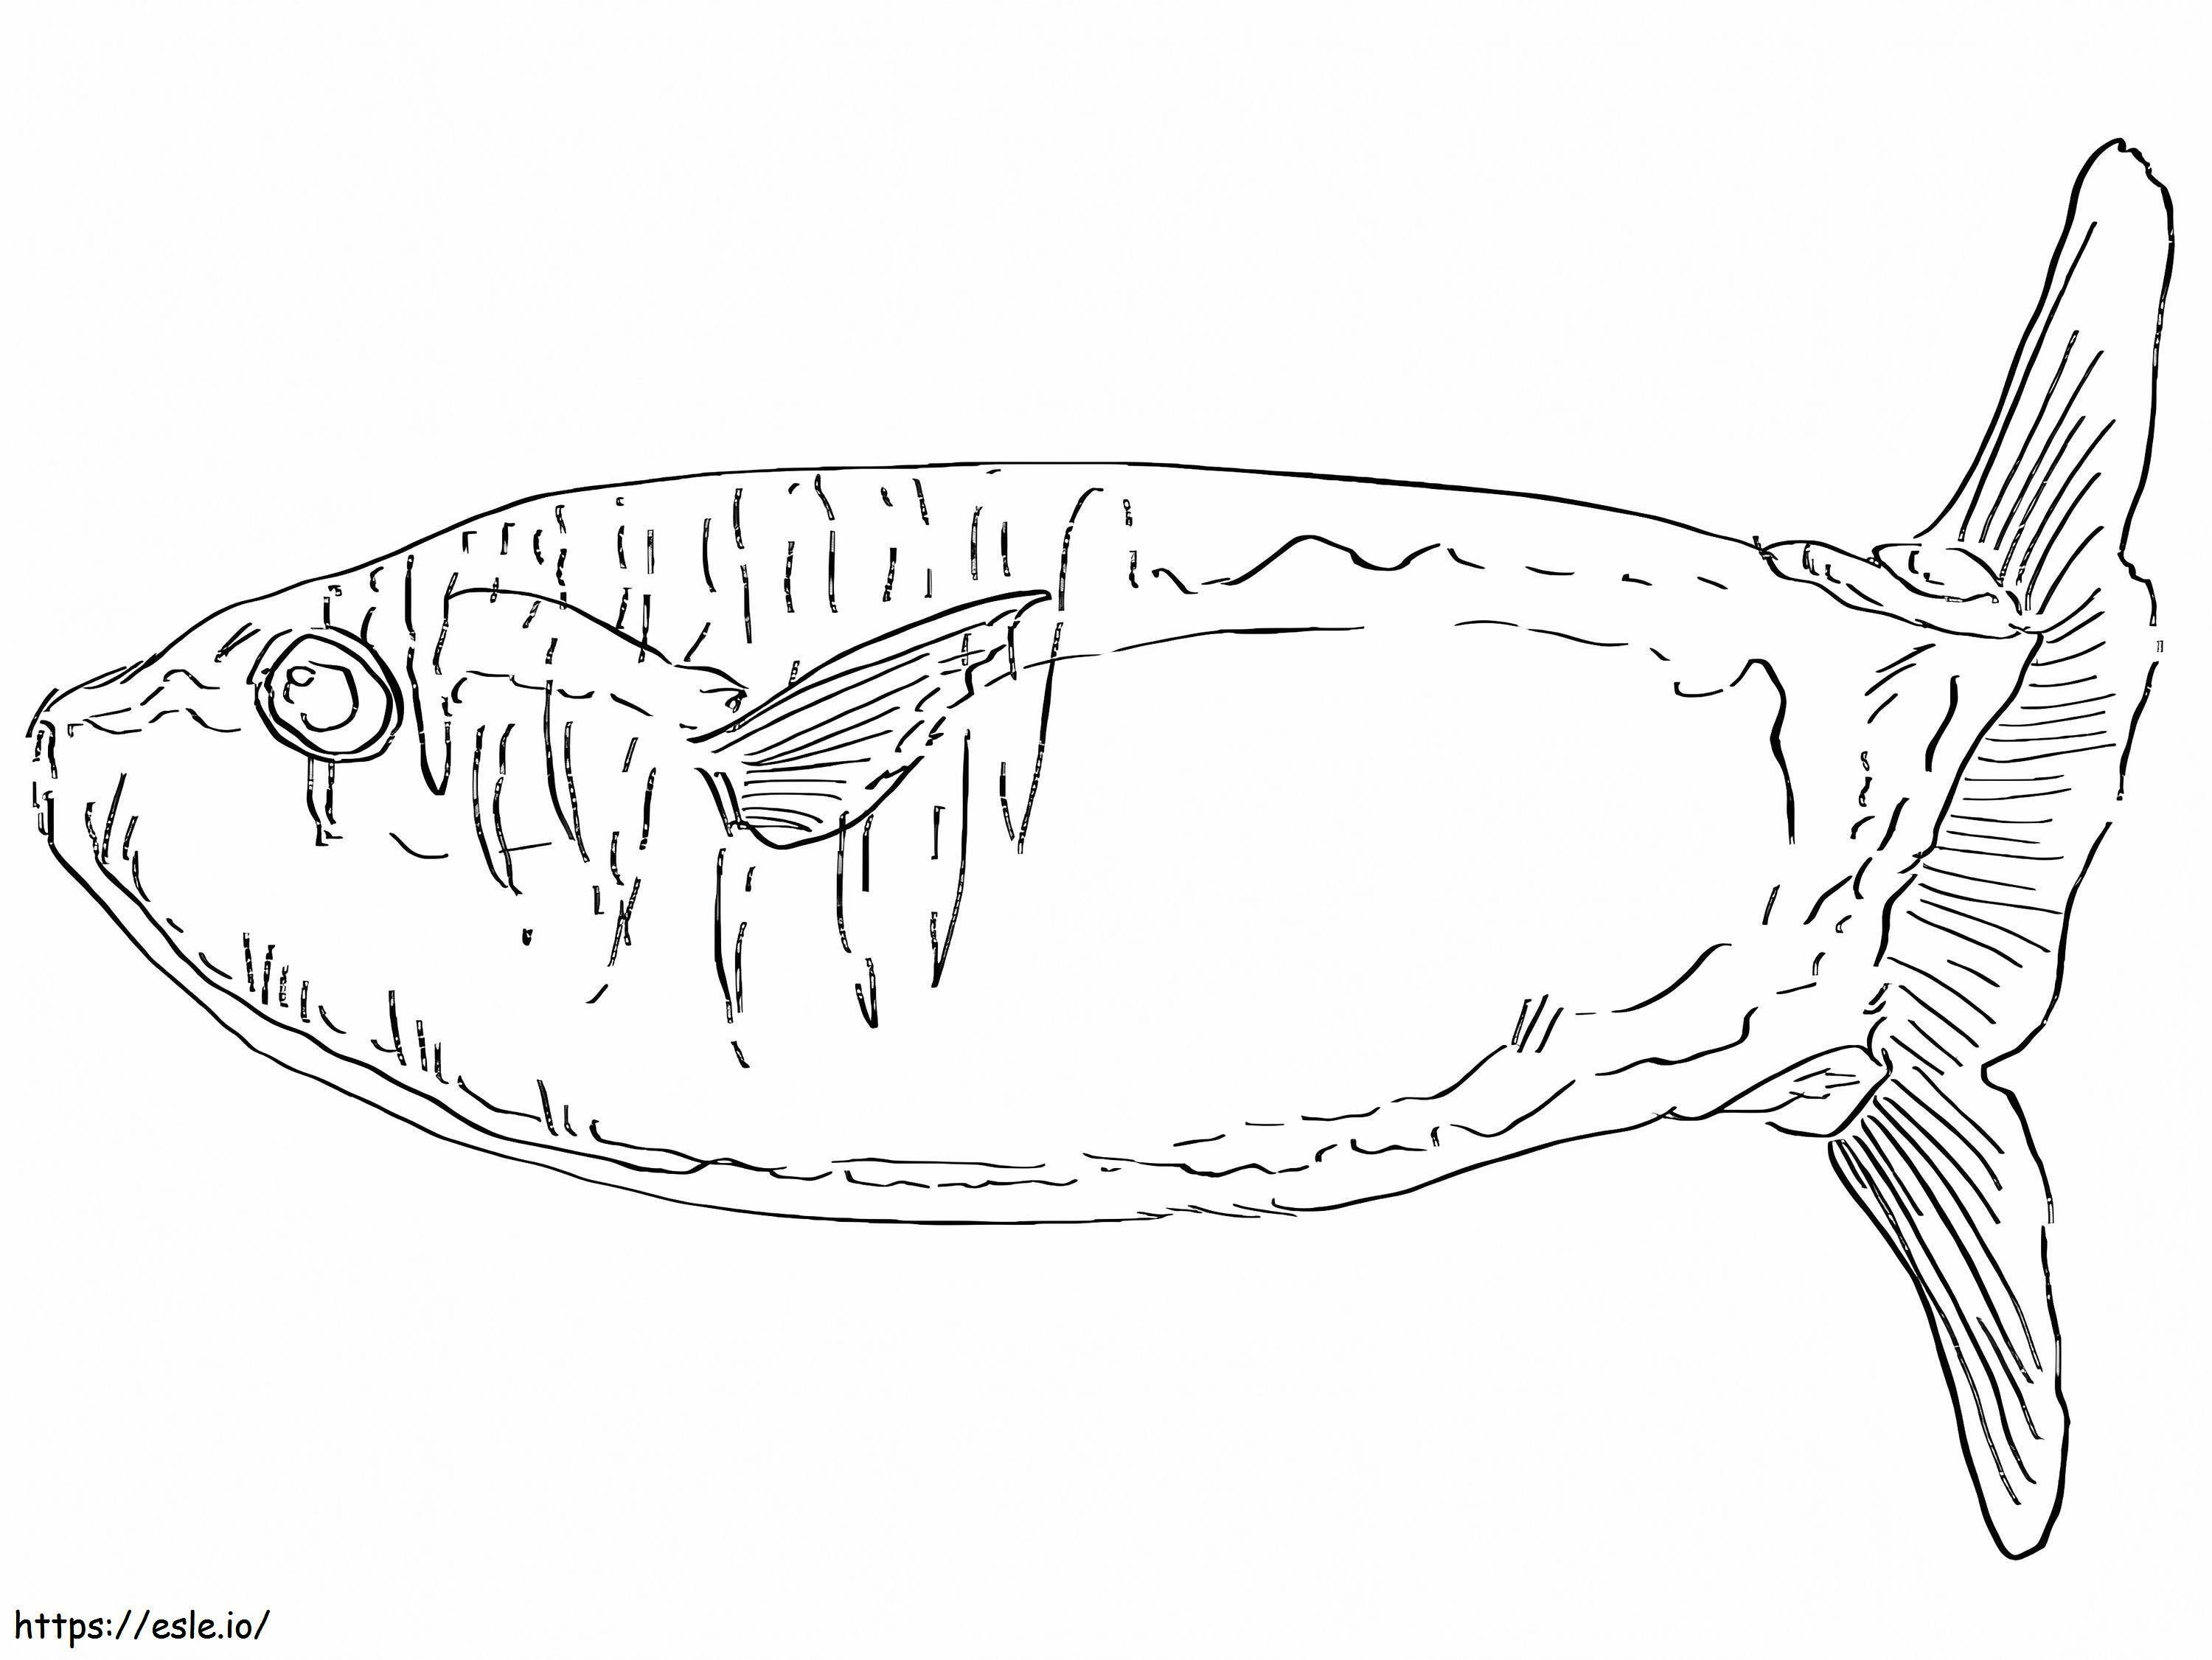 Slender Sunfish coloring page